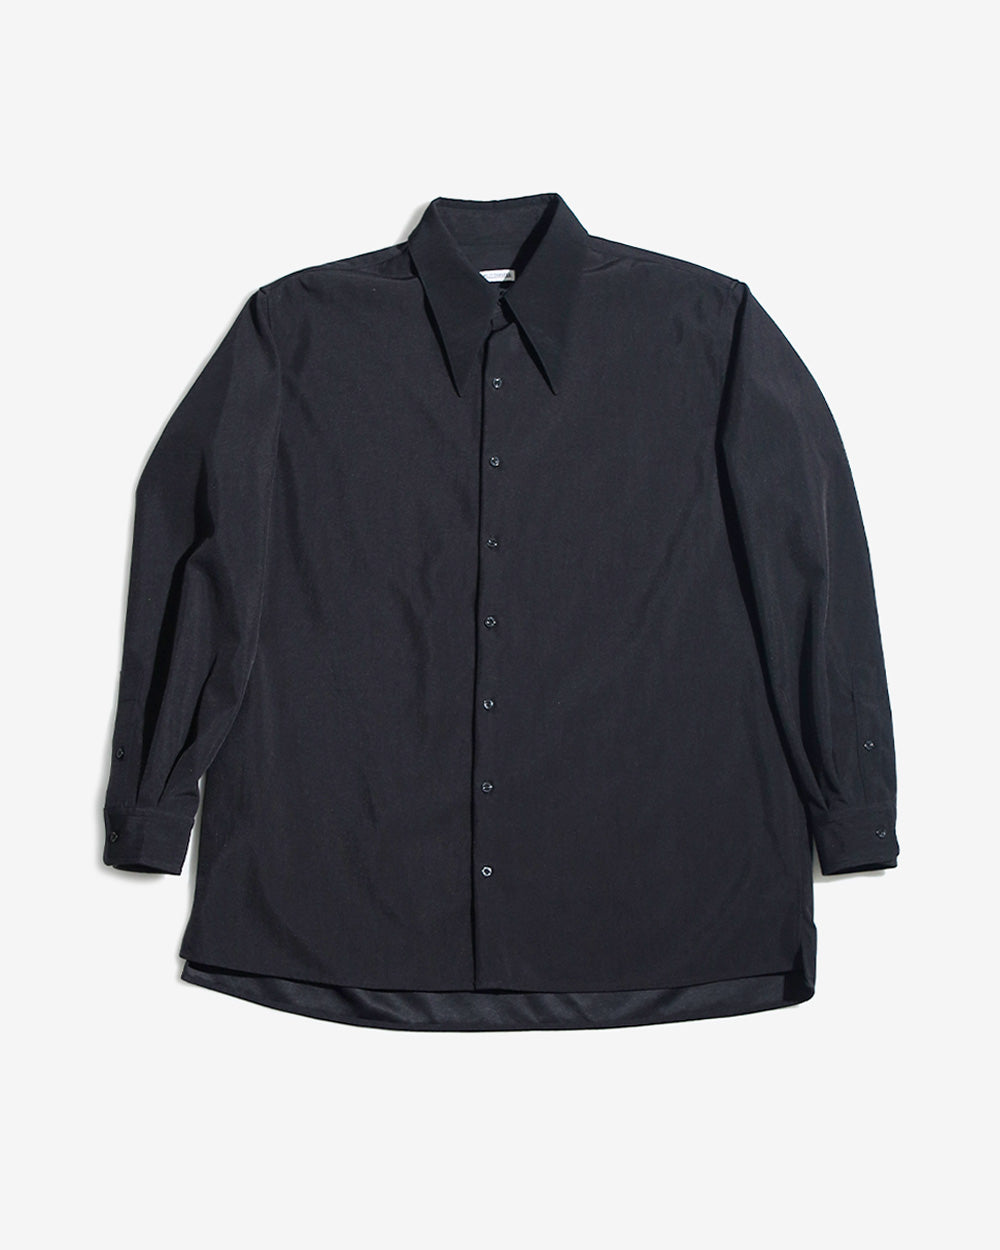 WILLY CHAVARRIA / Point Collar Shirt Black - Road Sign